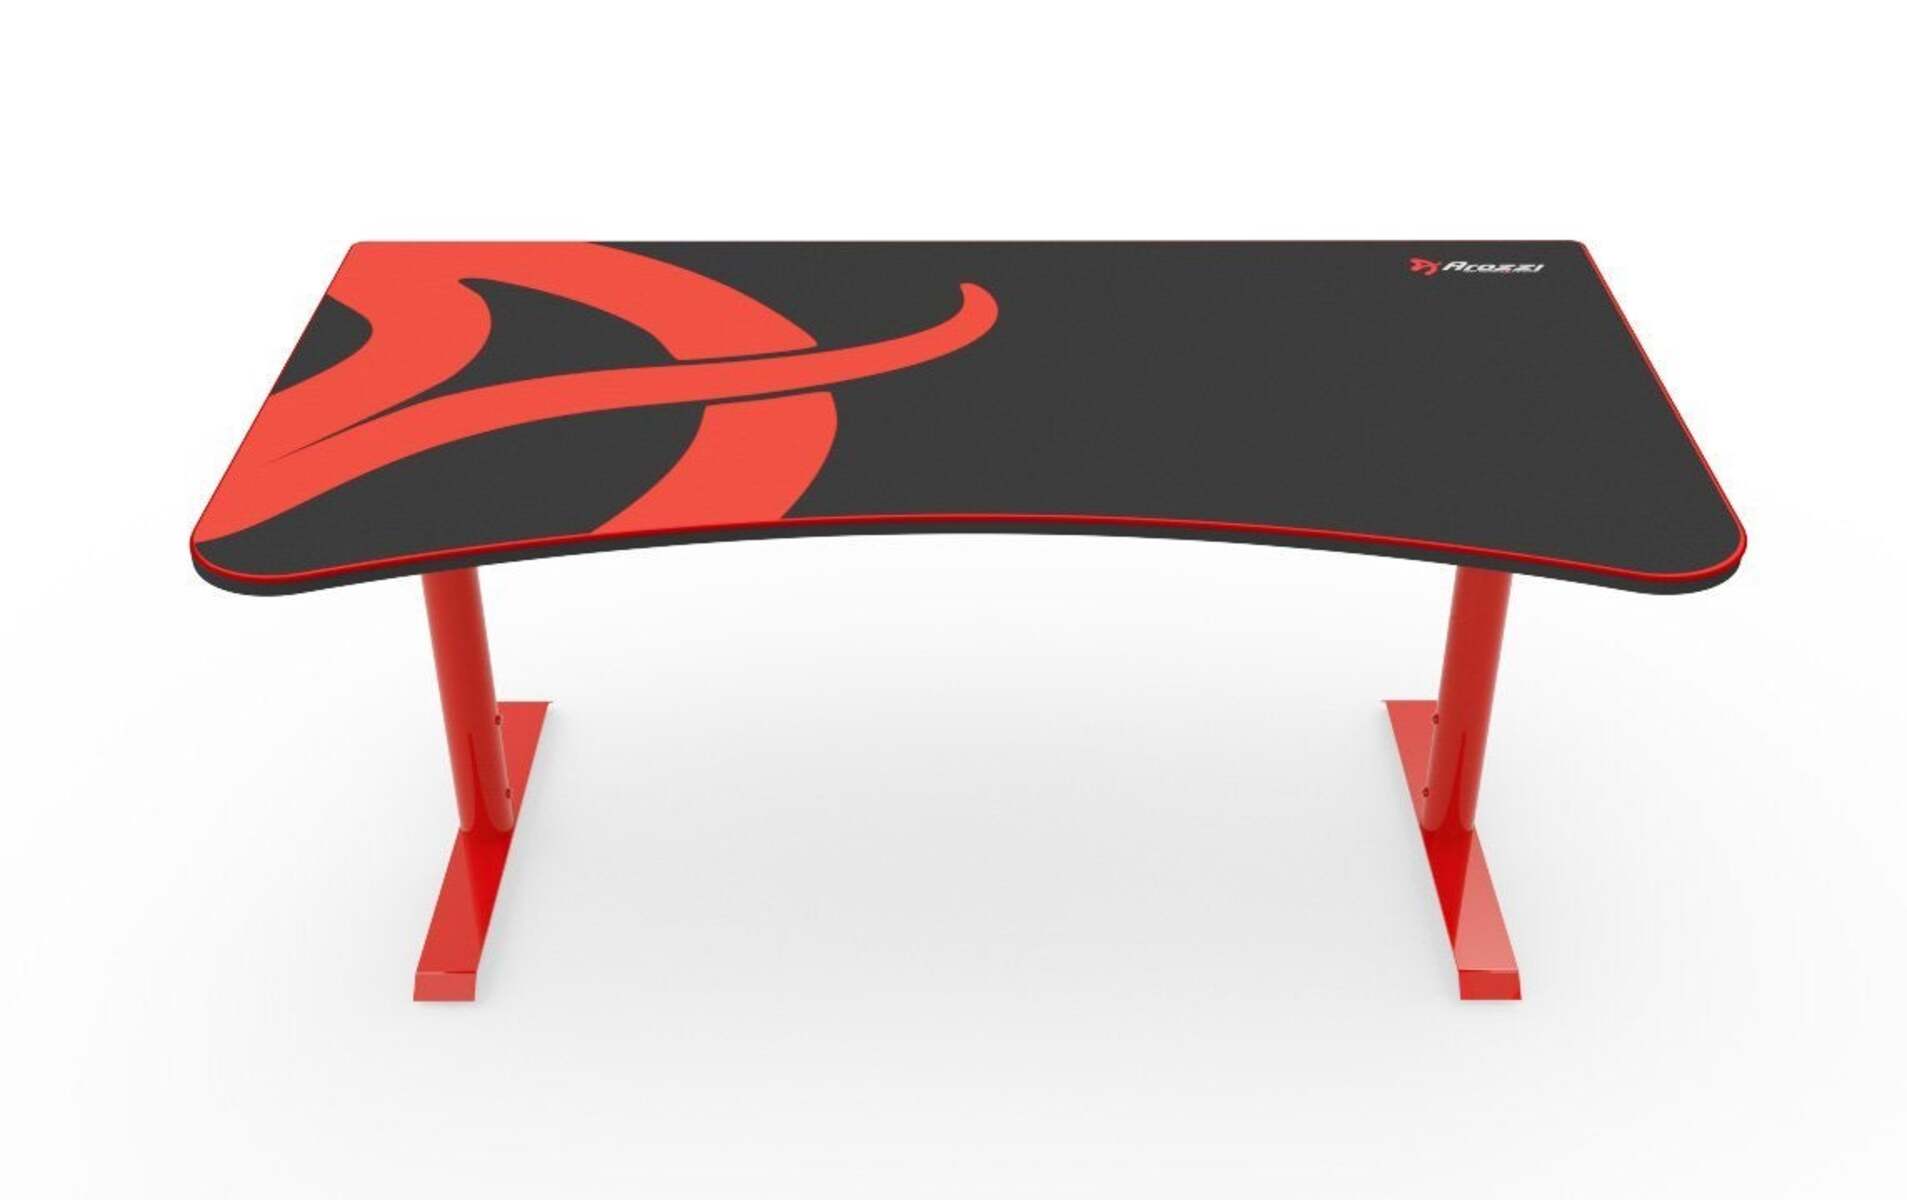 Arozzi Arena Gaming Desk: What Tools I Need